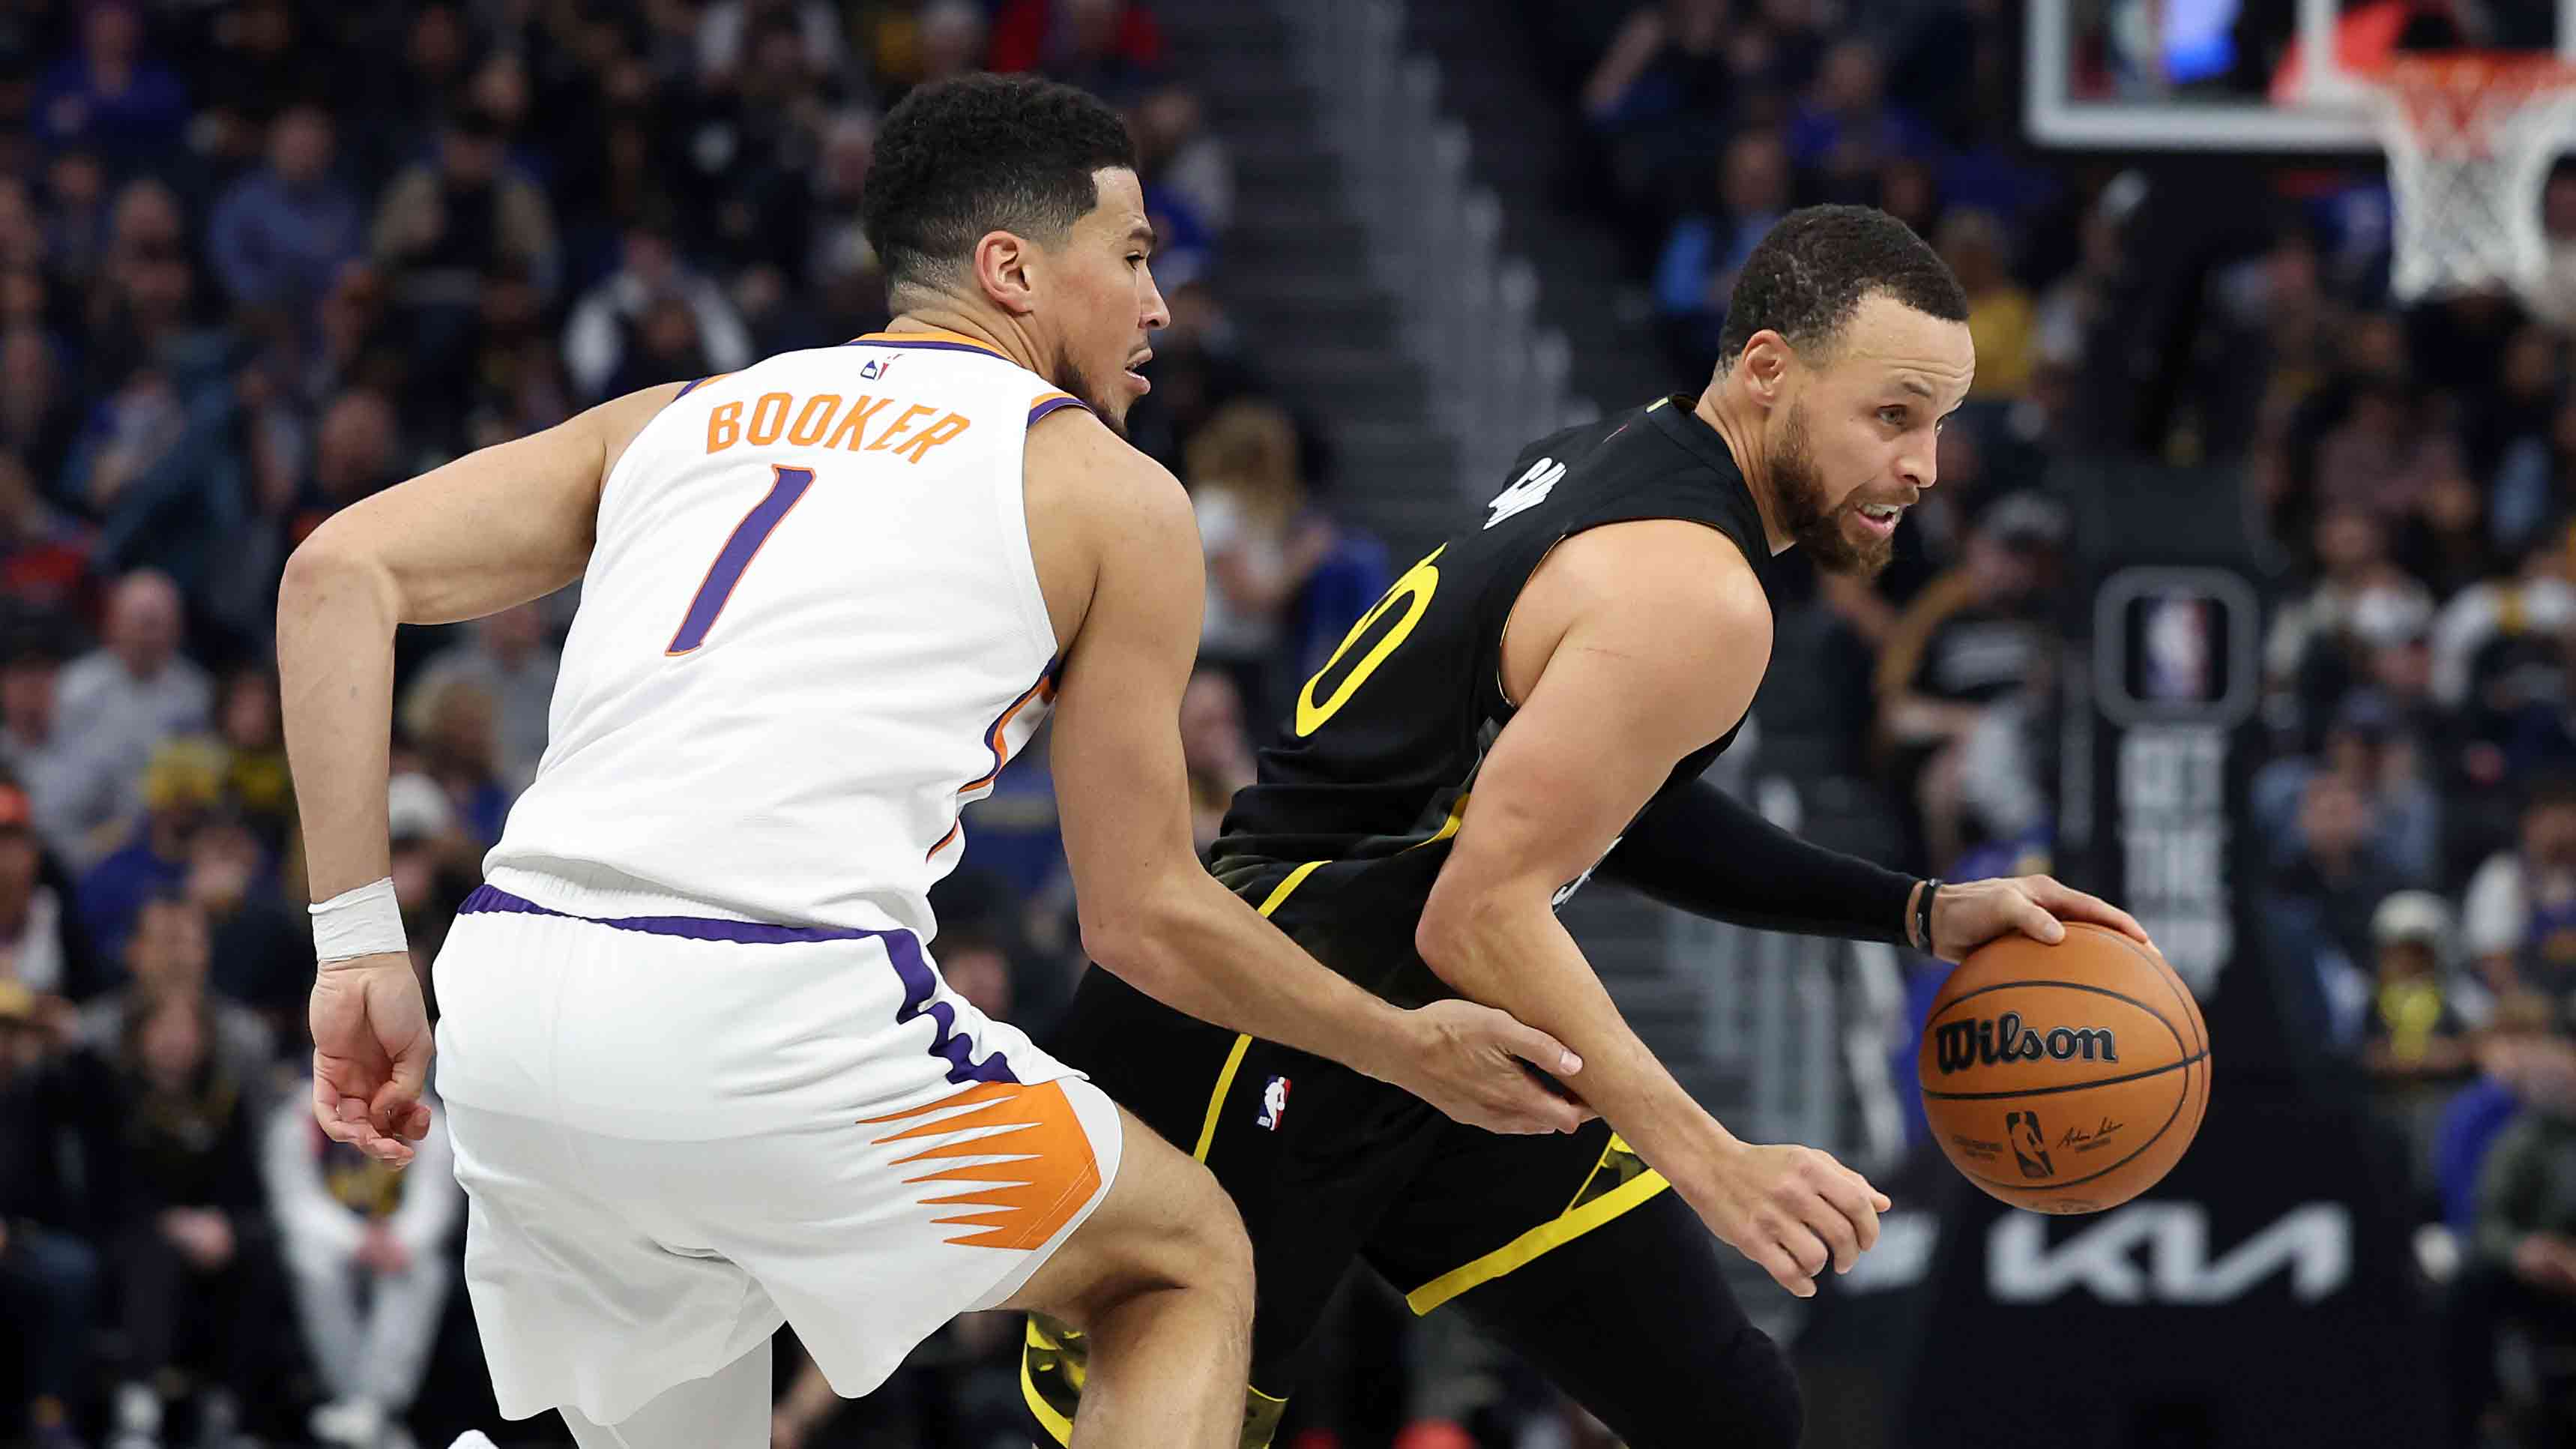 Suns agree to deals with Damion Lee, Yuta Watanabe Drew Eubanks